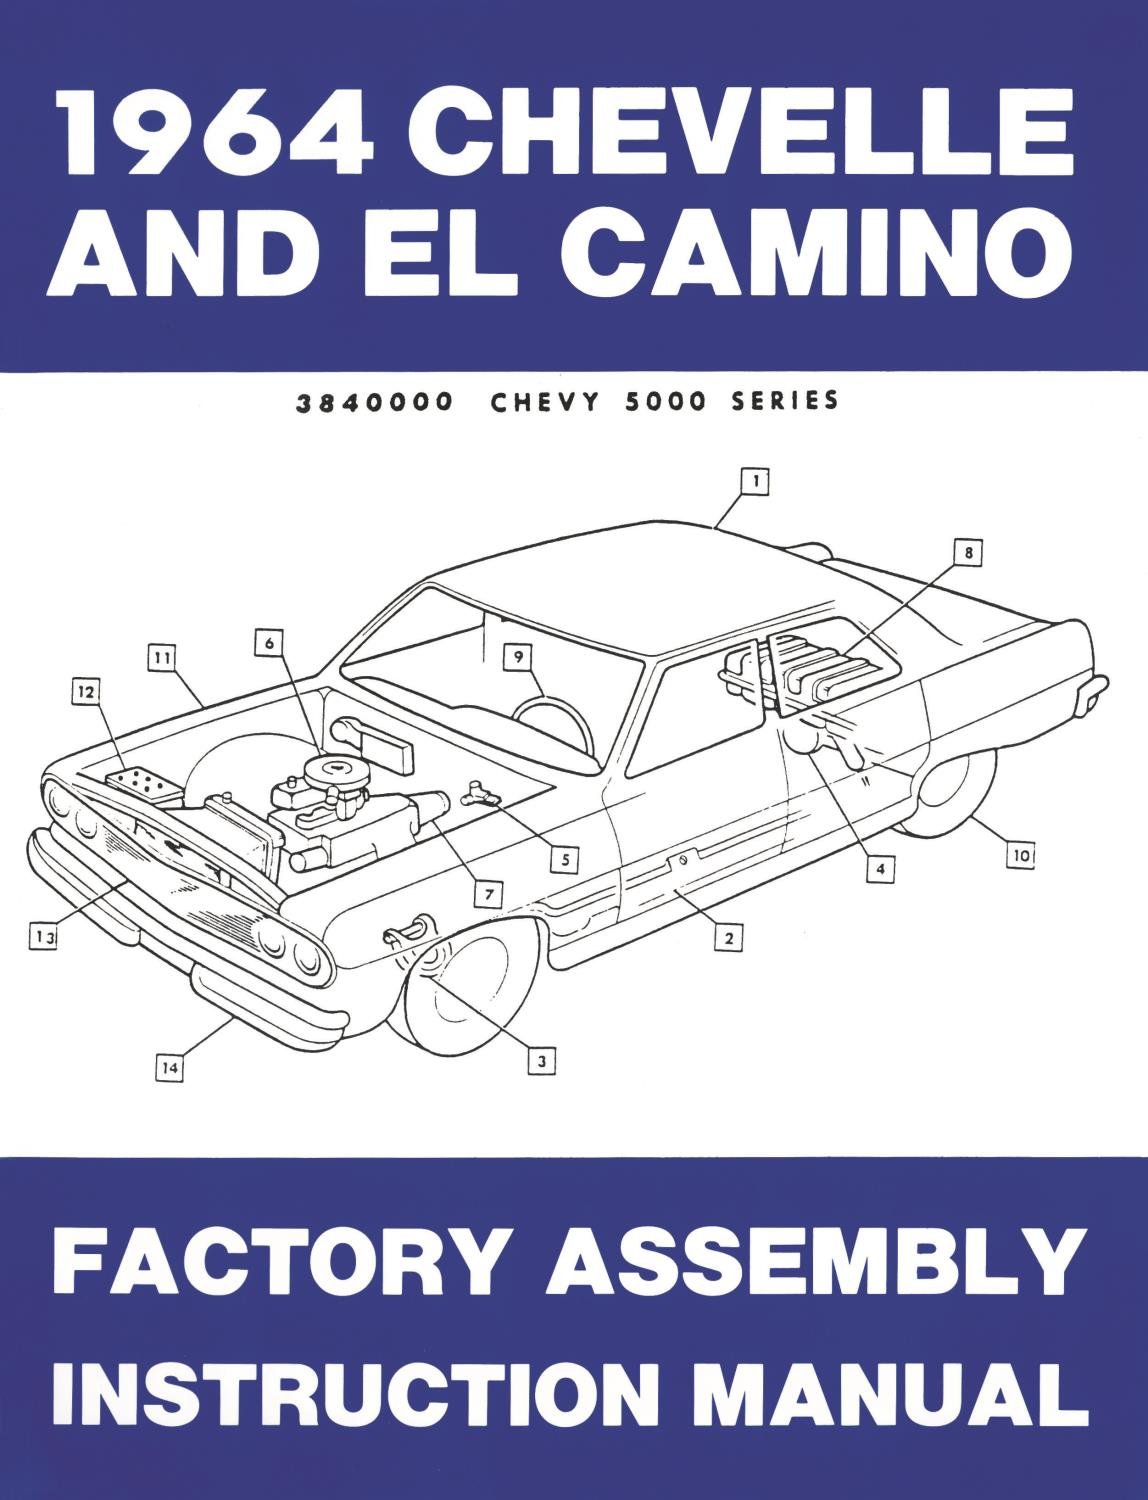 Factory Assembly Instruction Manual for 1964 Chevrolet Chevelle, El Camino and Malibu